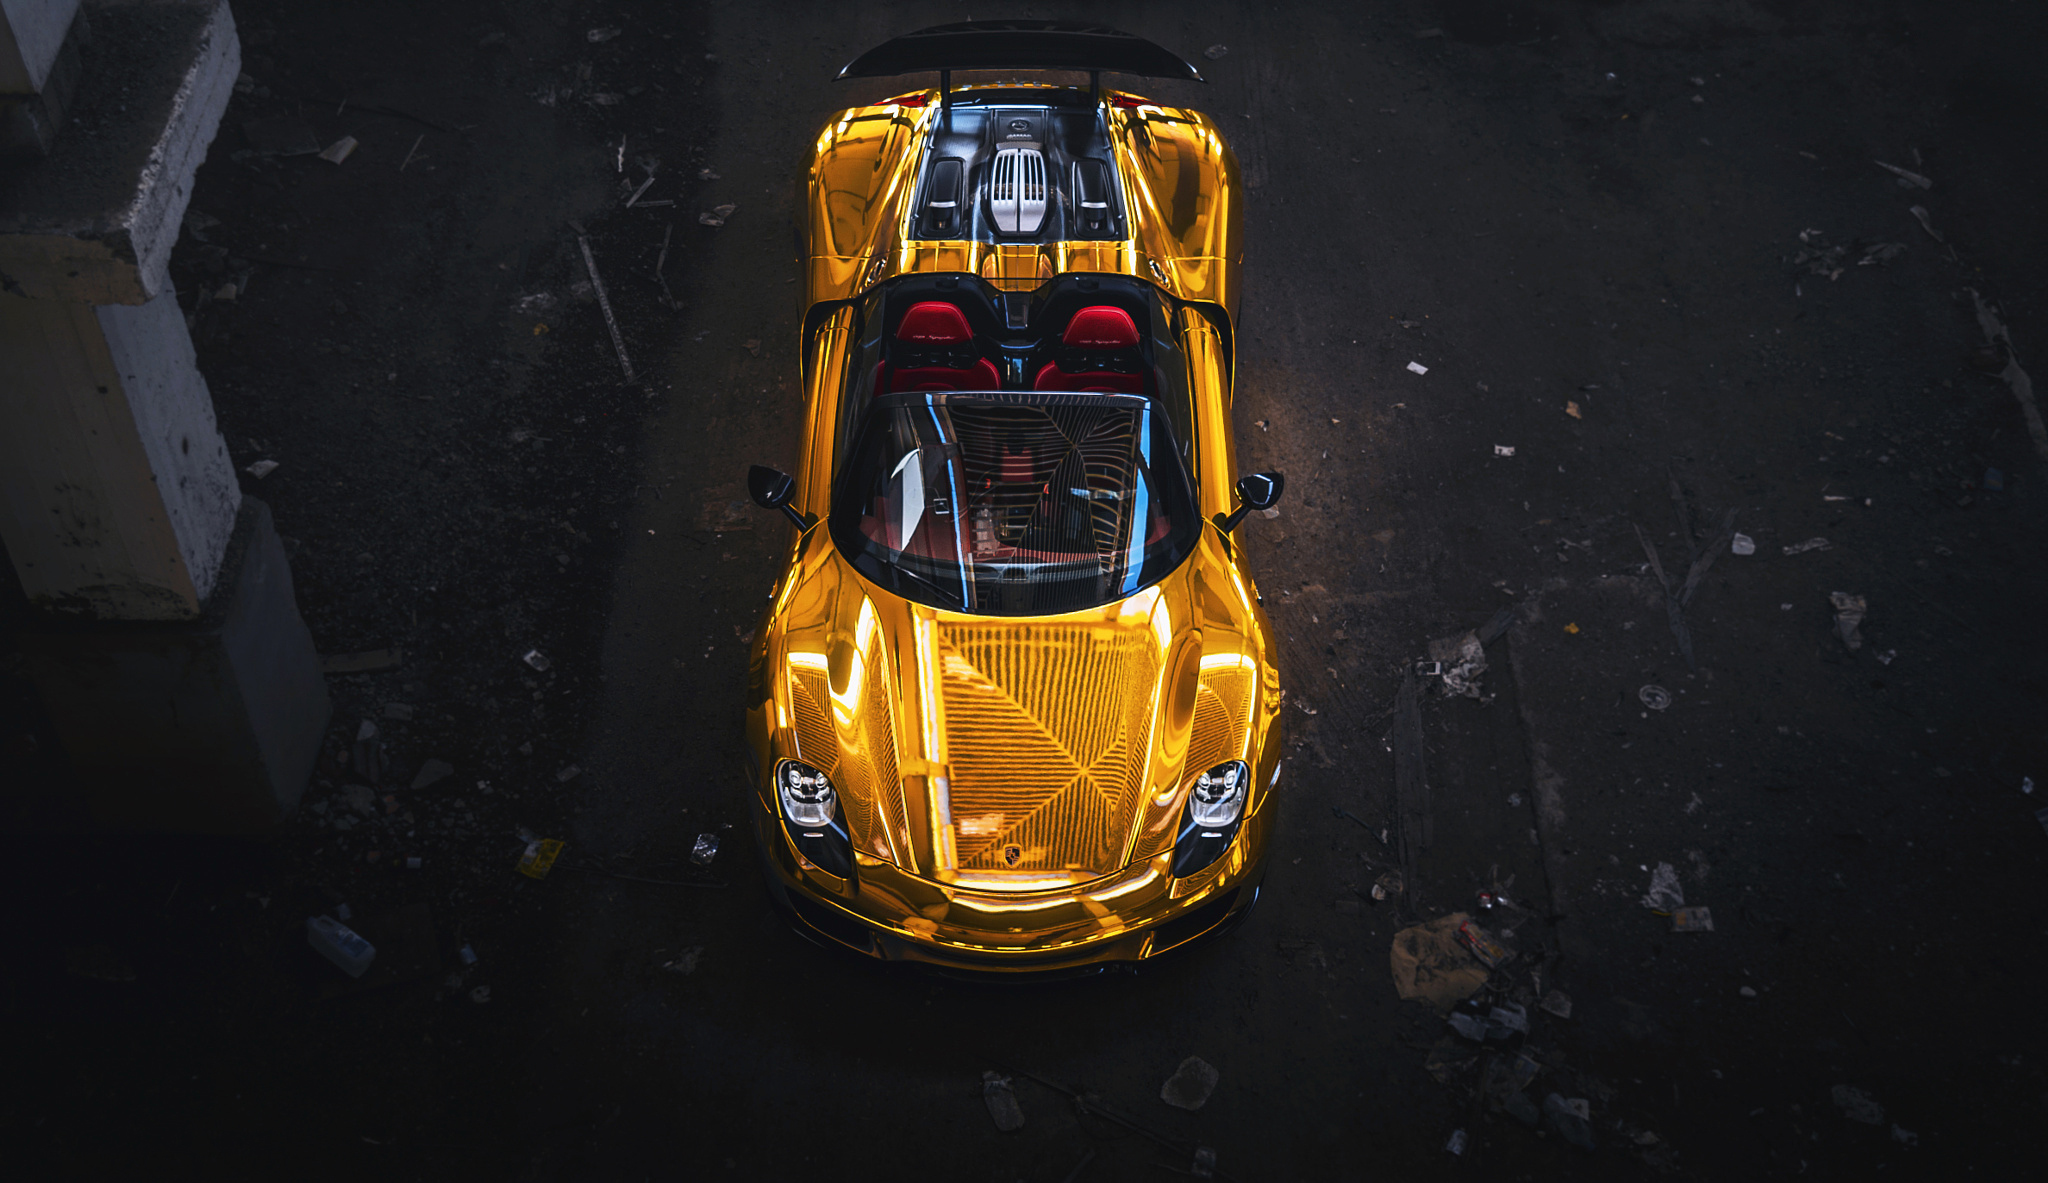 377152 free wallpaper 720x1280 for phone, download images car, yellow car, supercar, vehicles 720x1280 for mobile